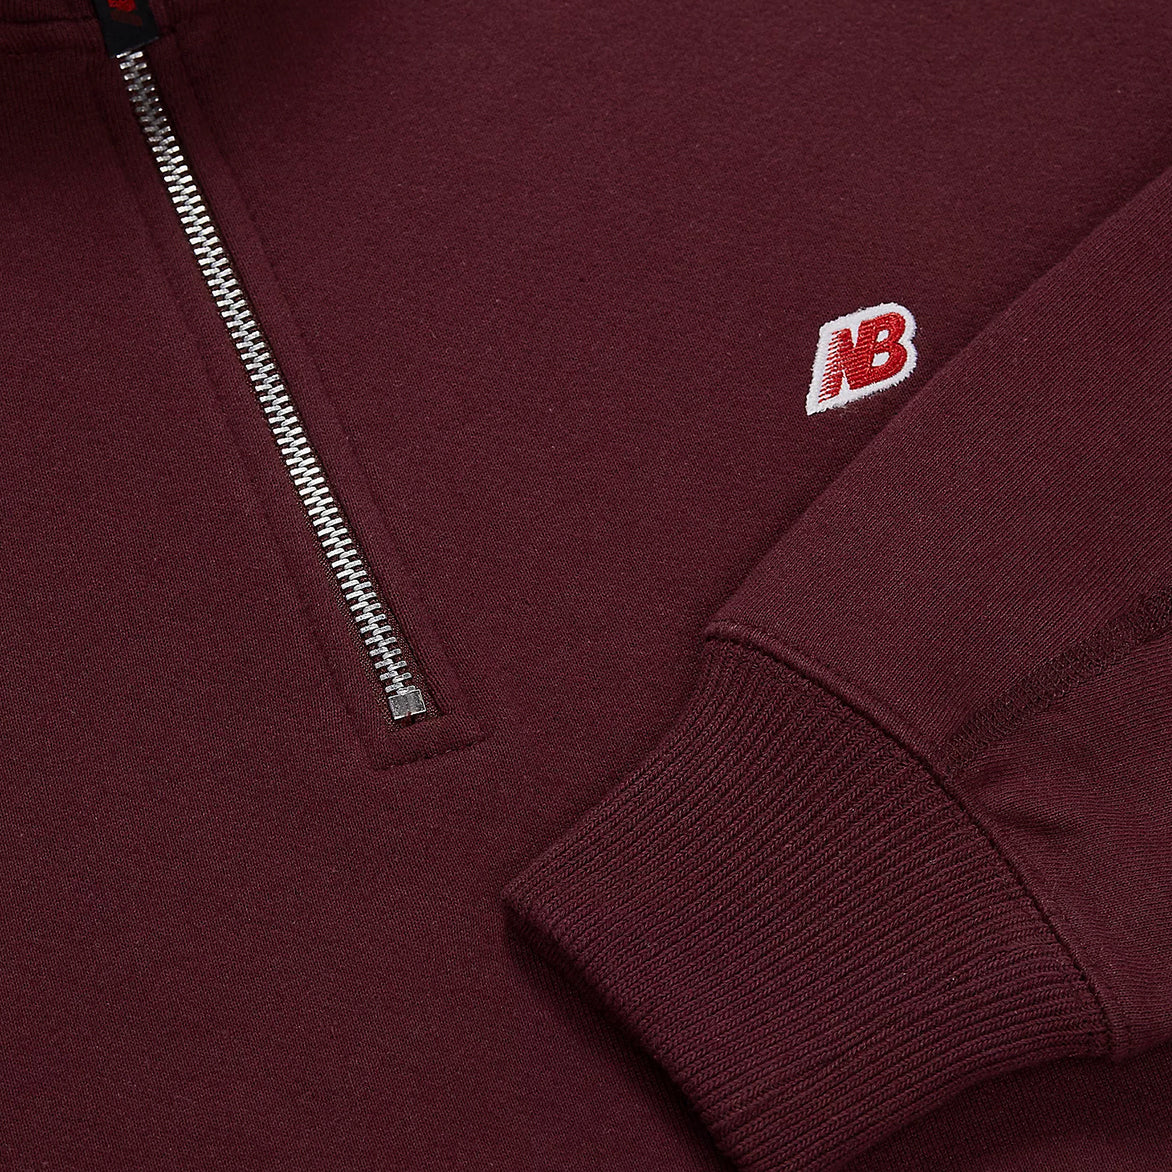 MADE IN USA QUARTER ZIP PULLOVER - BURGUNDY